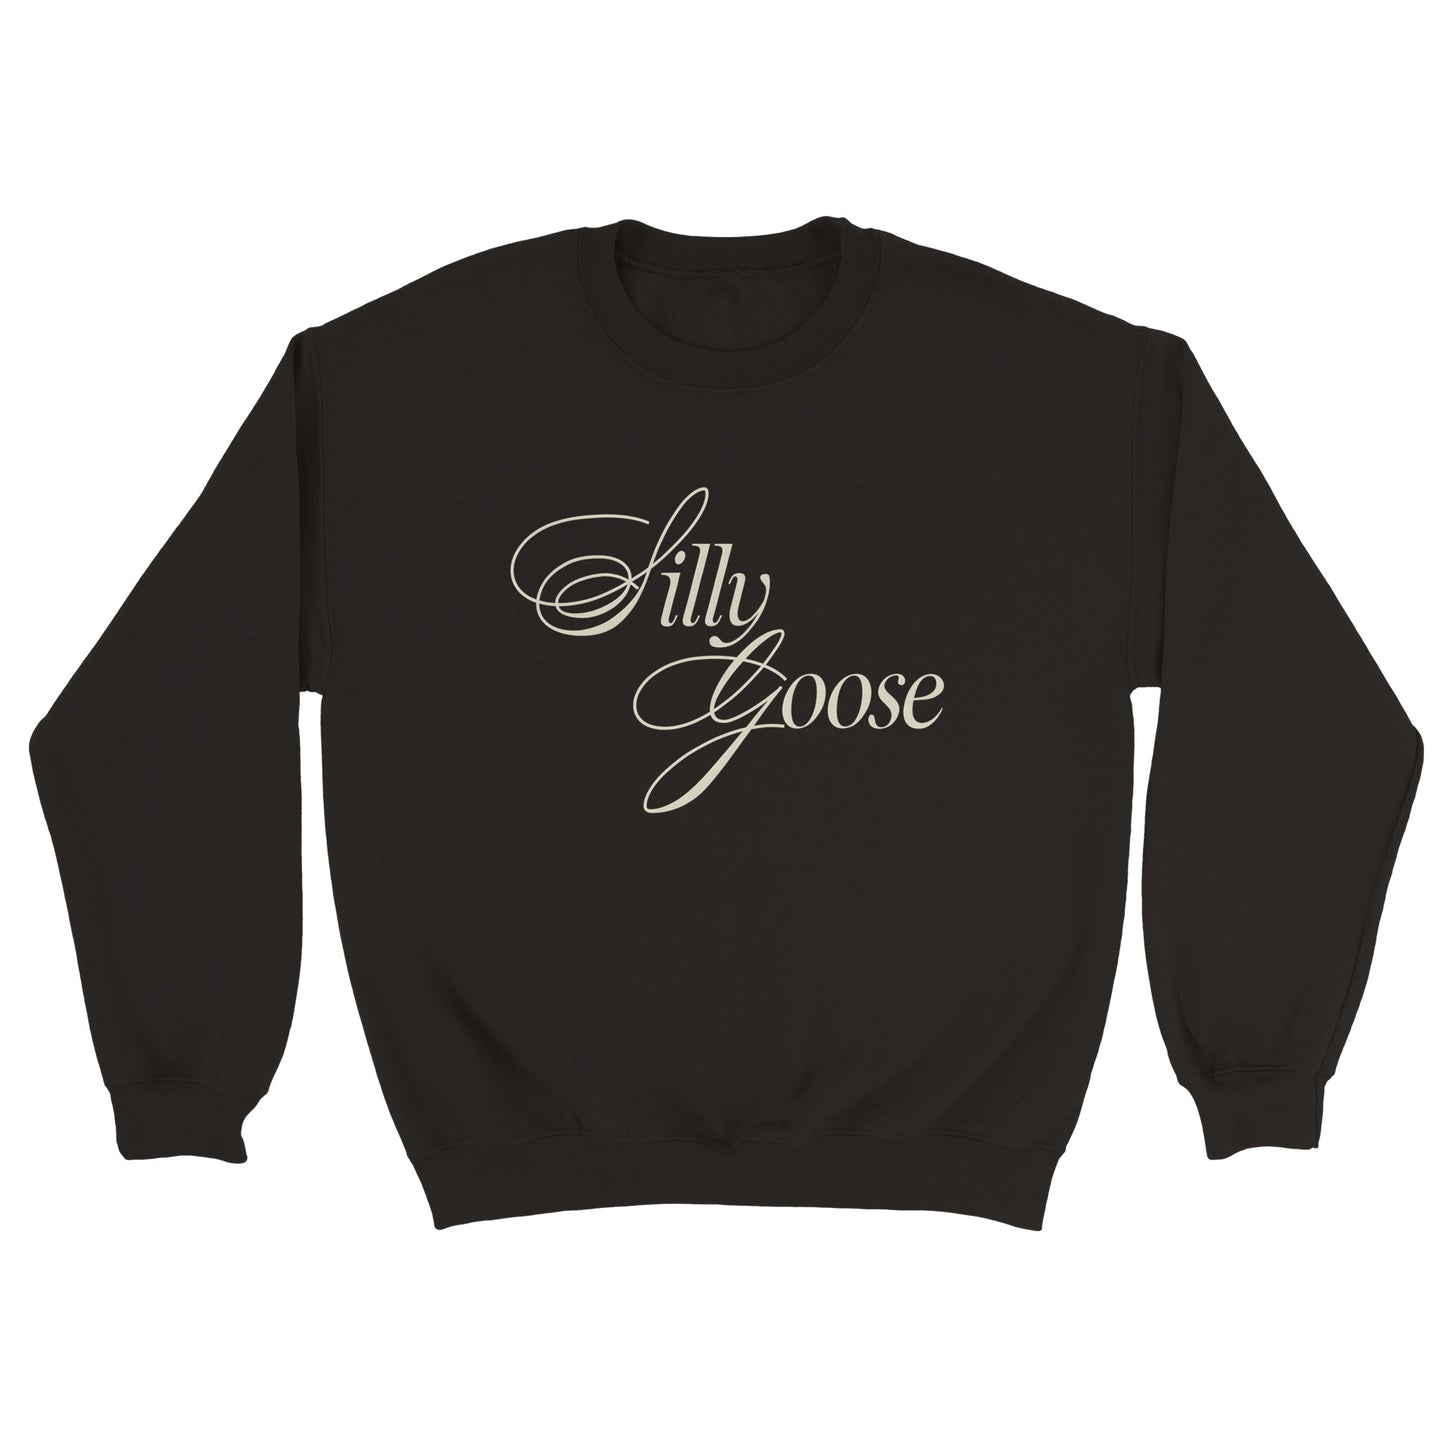 a black sweater with the word Silly Goose printed on